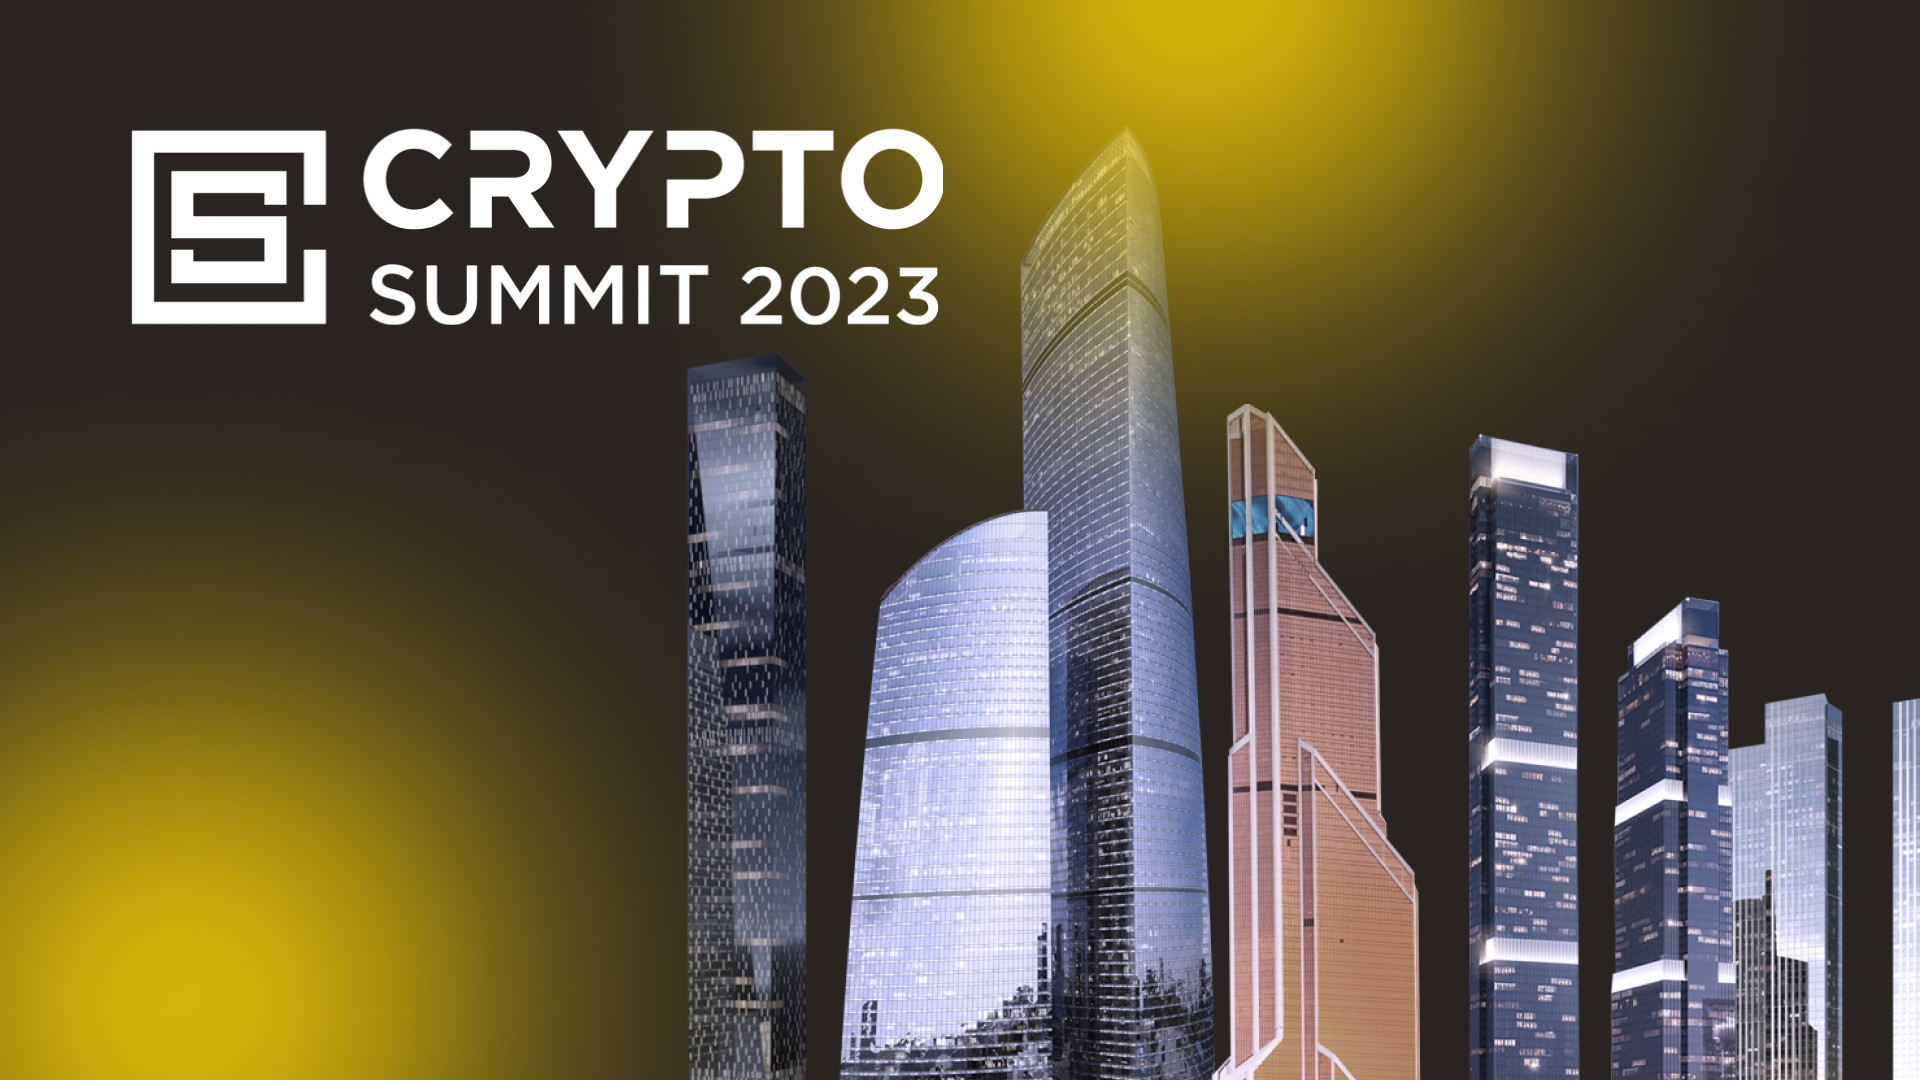 Crypto Summit 2023 in Moscow